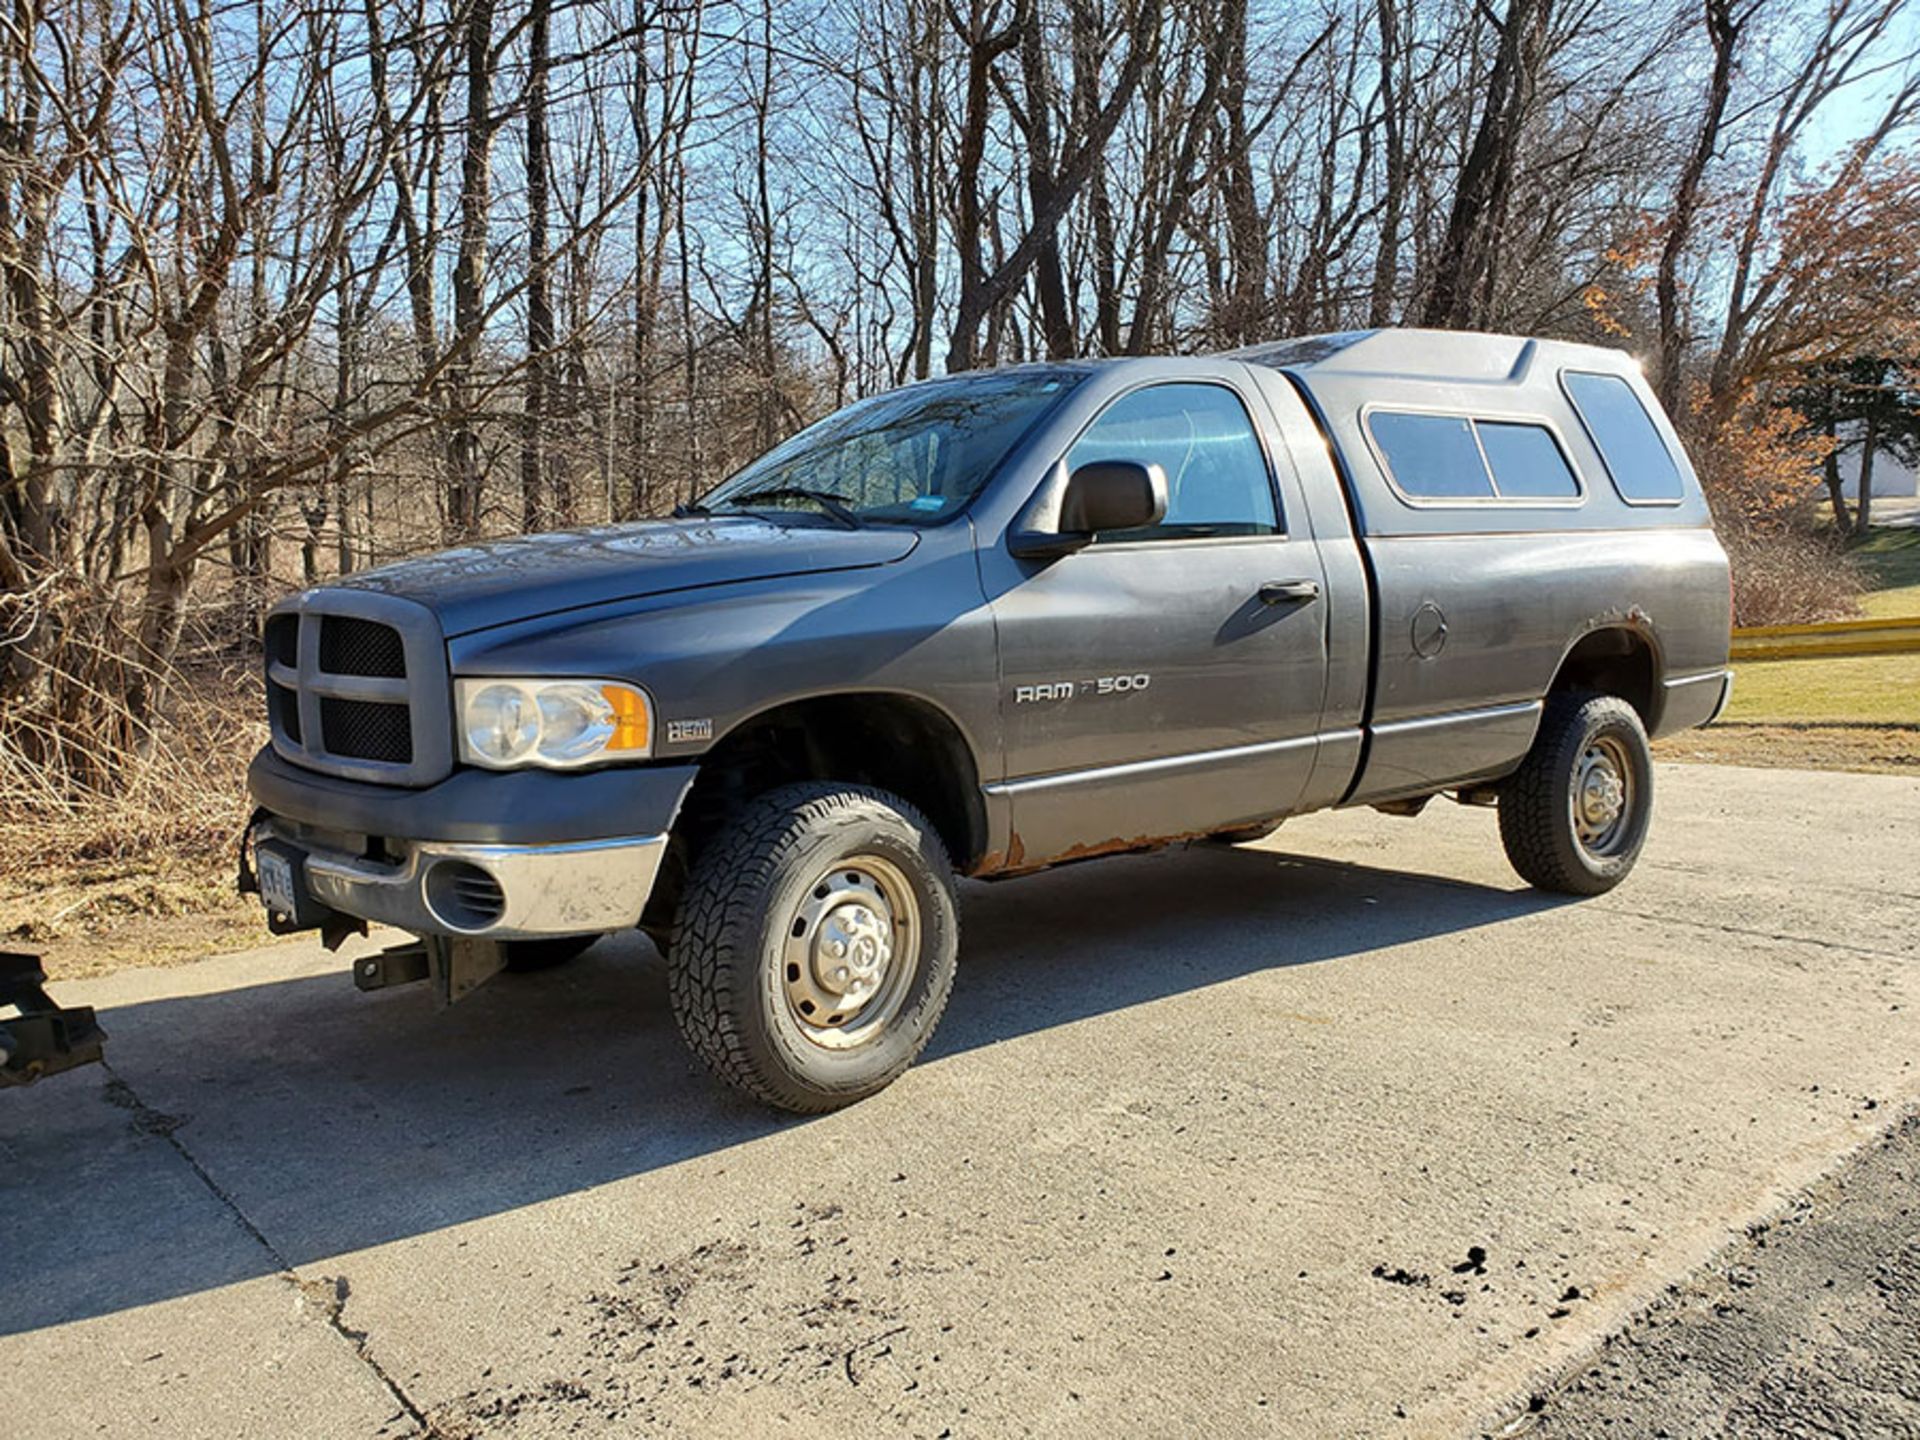 2004 DODGE 2500 4X4 PICKUP TRUCK; WITH 5.7 LITER HEMI MAGNUM, CAMPER SHELL, MINUTE MOUNT (2) - Image 5 of 23